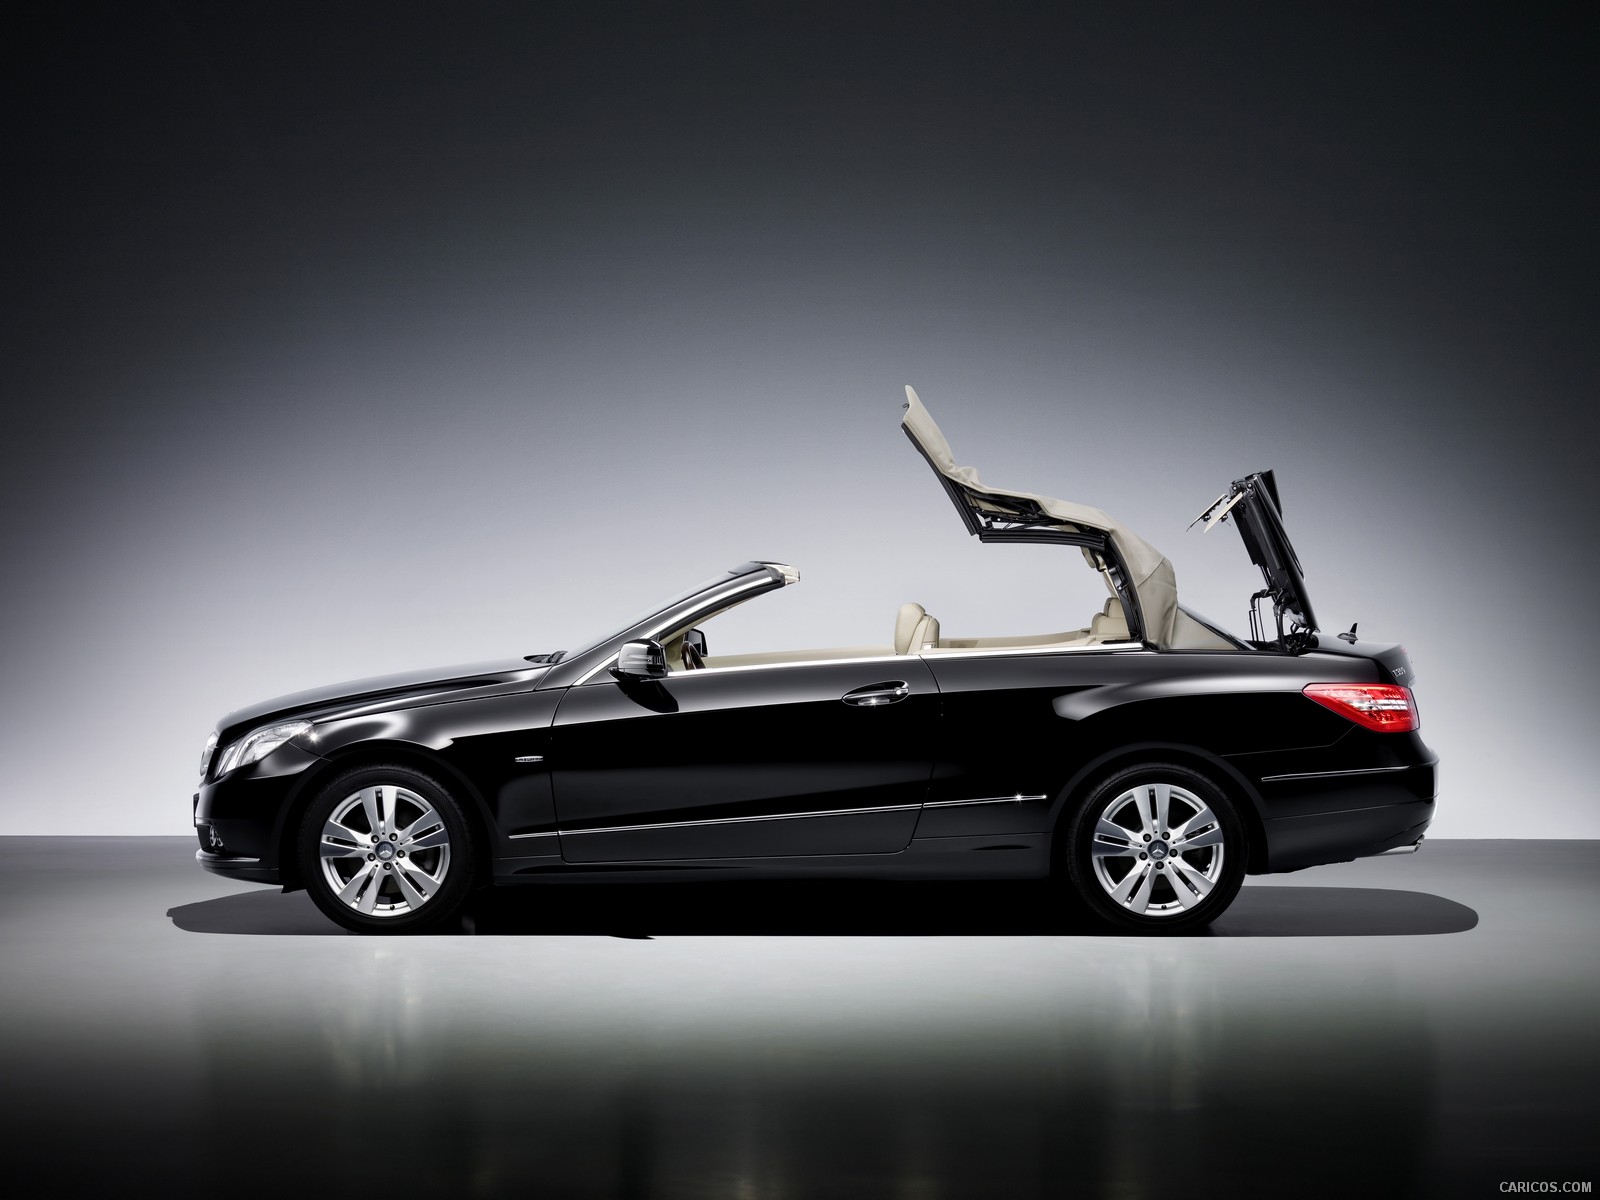 Mercedes-Benz E-Class Cabriolet - Top In Action - , #79 of 165